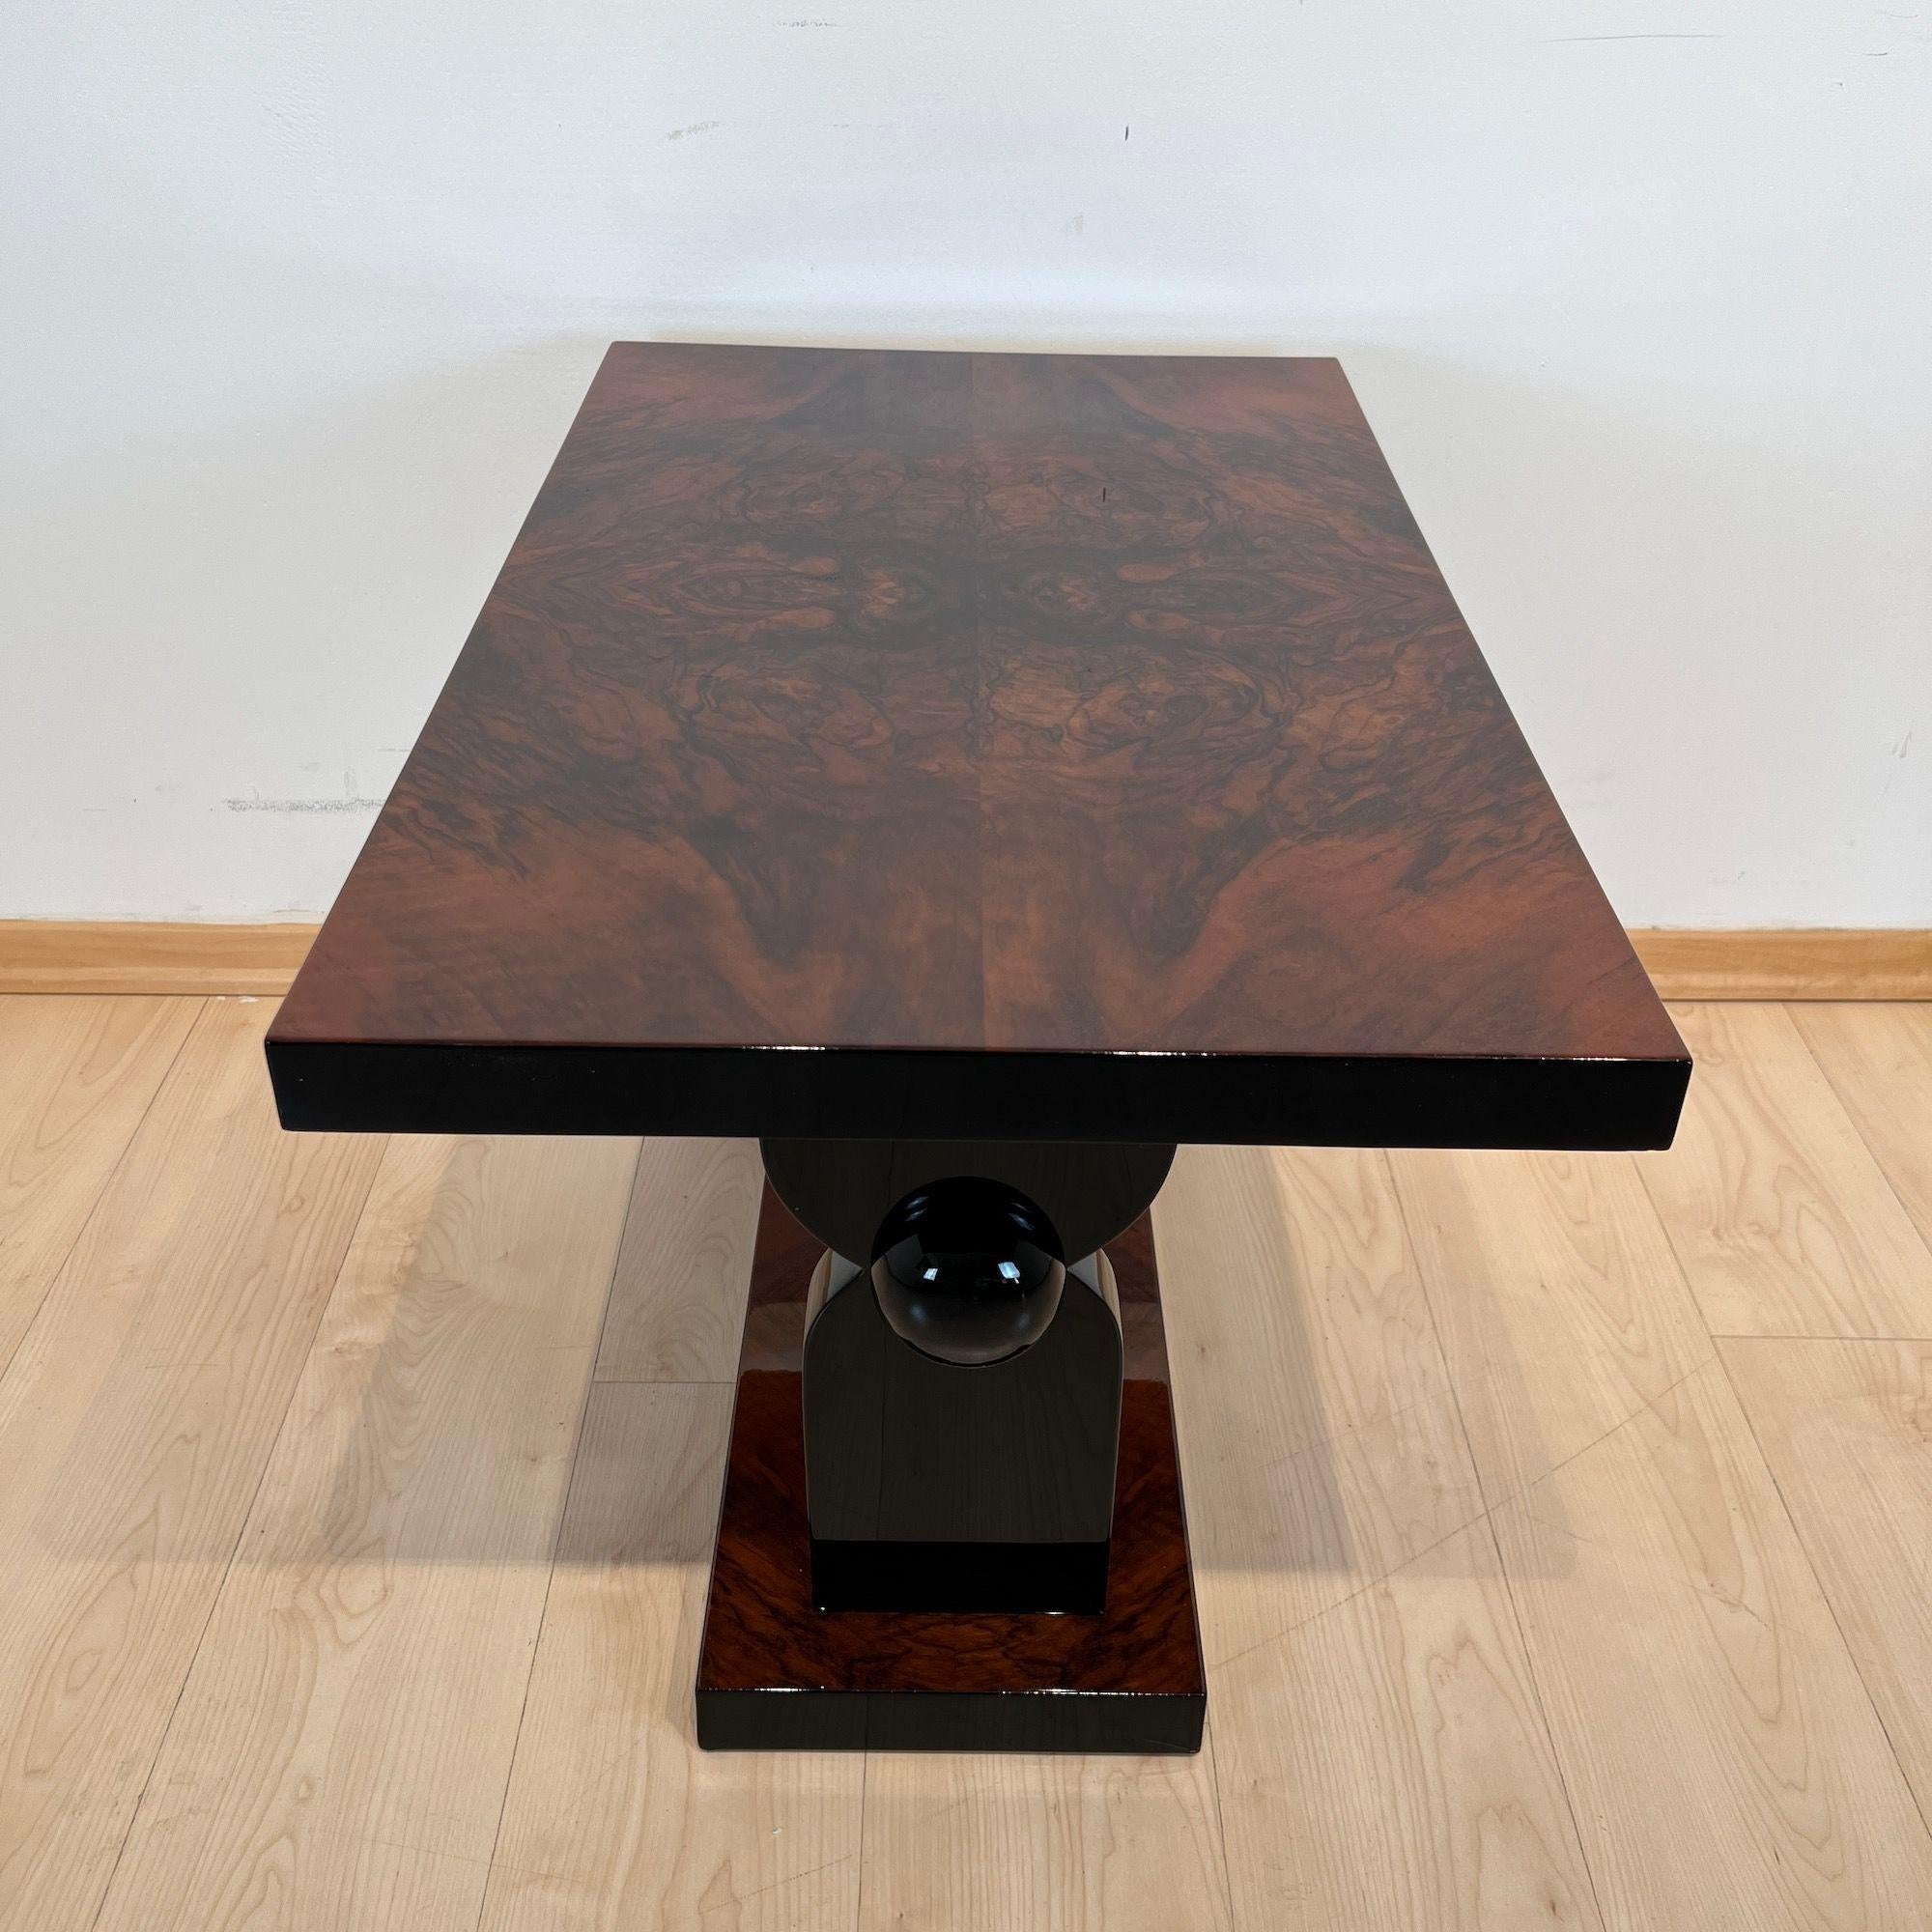 Rectangular Art Deco Side Table, Walnut Veneer, Chrome, France circa 1930
Very beautiful book-matched walnut veneer on the top and base. High-quality high-gloss lacquer surface.
Steel and edges lacquered in black. Four polished horizontal